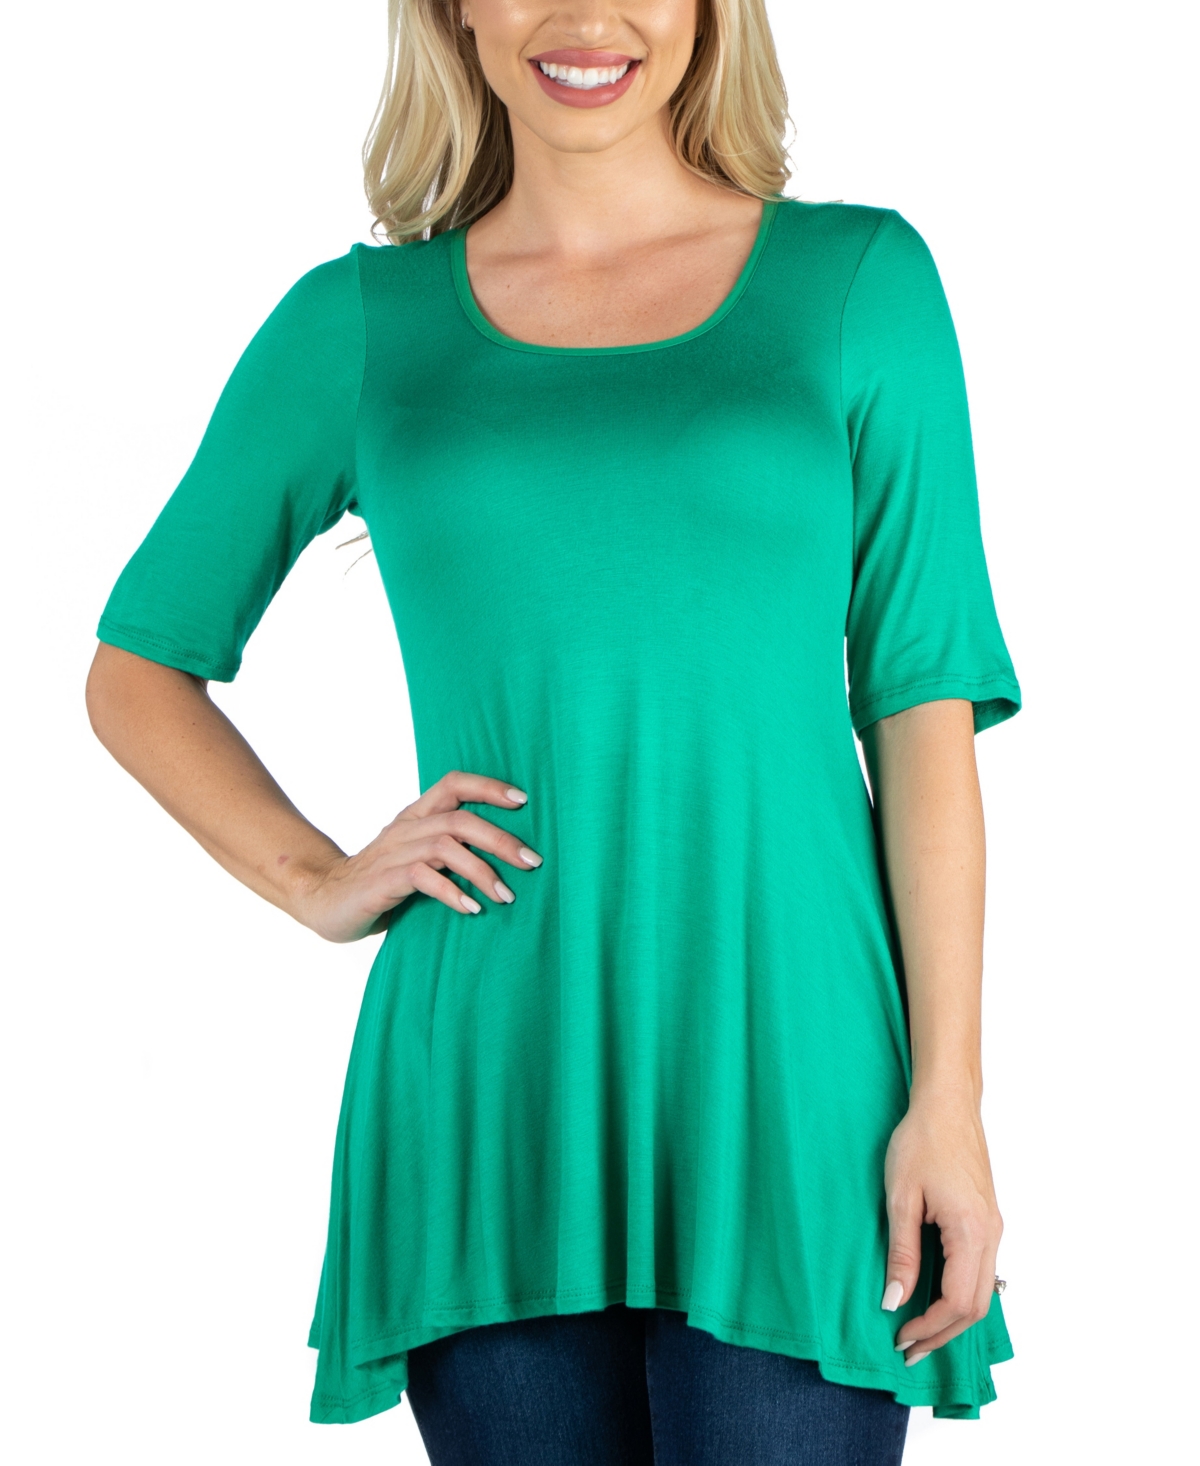 Elbow Sleeve Swing Tunic Top For Women - Turquoise